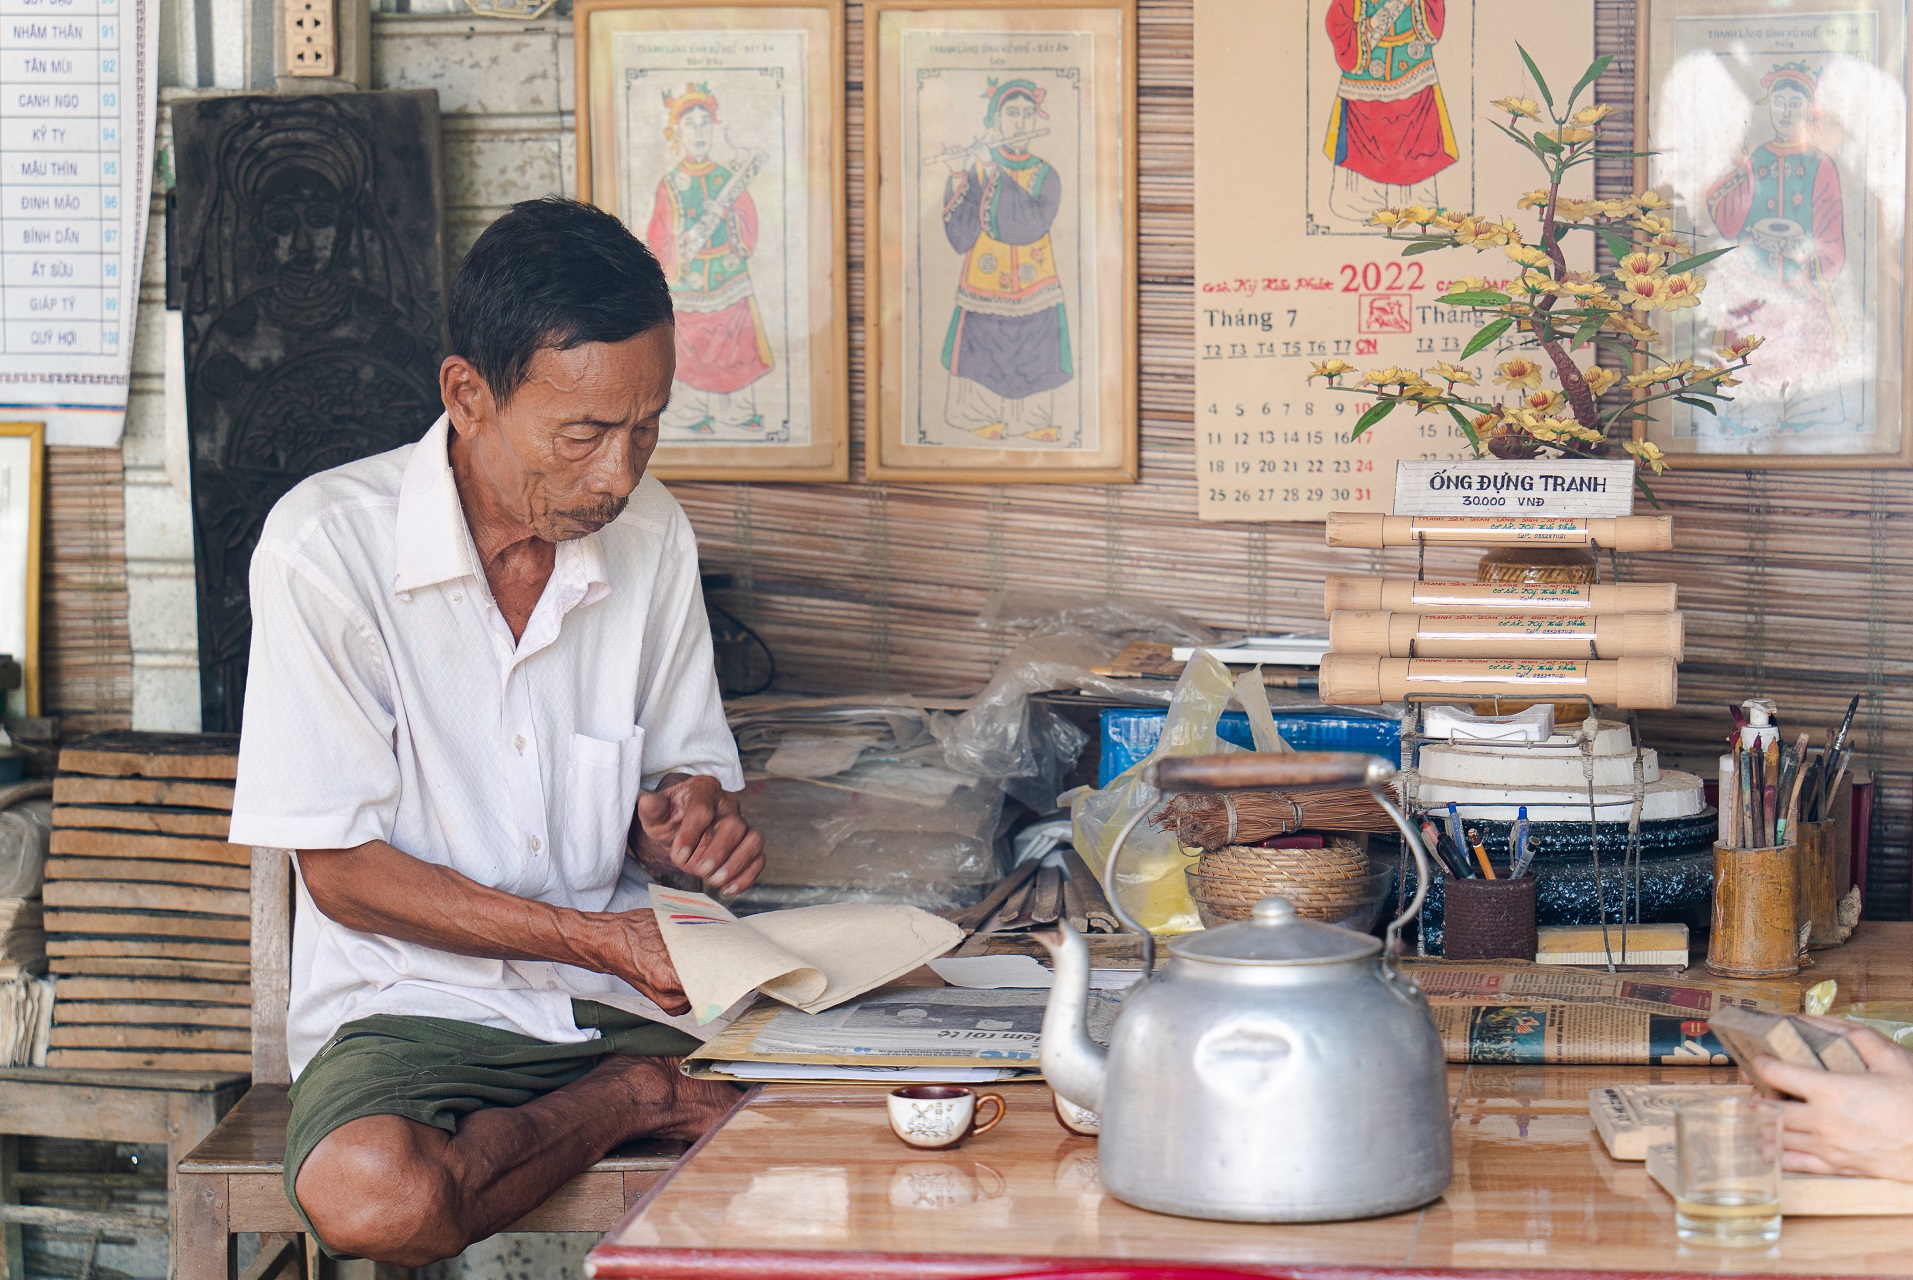 Artisan Ky Huu Phuoc is a former student of Hue High School for the Gifted, the most well-known school in the central province of Thua Thien-Hue. Photo: Nguyen Trung Au / Tuoi Tre News